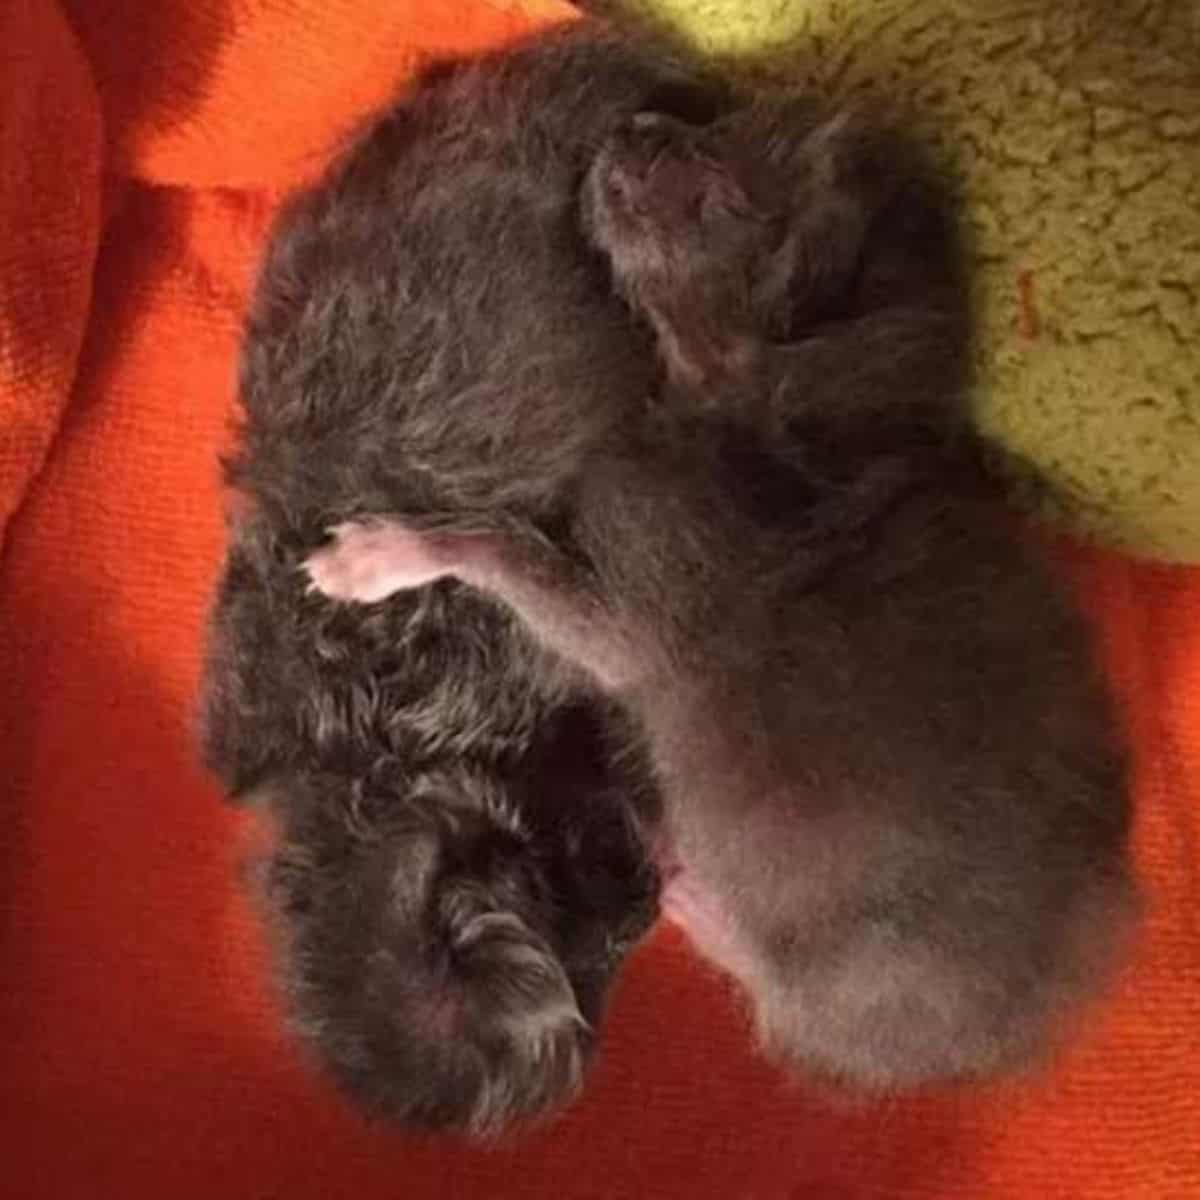 two small kittens sleeping